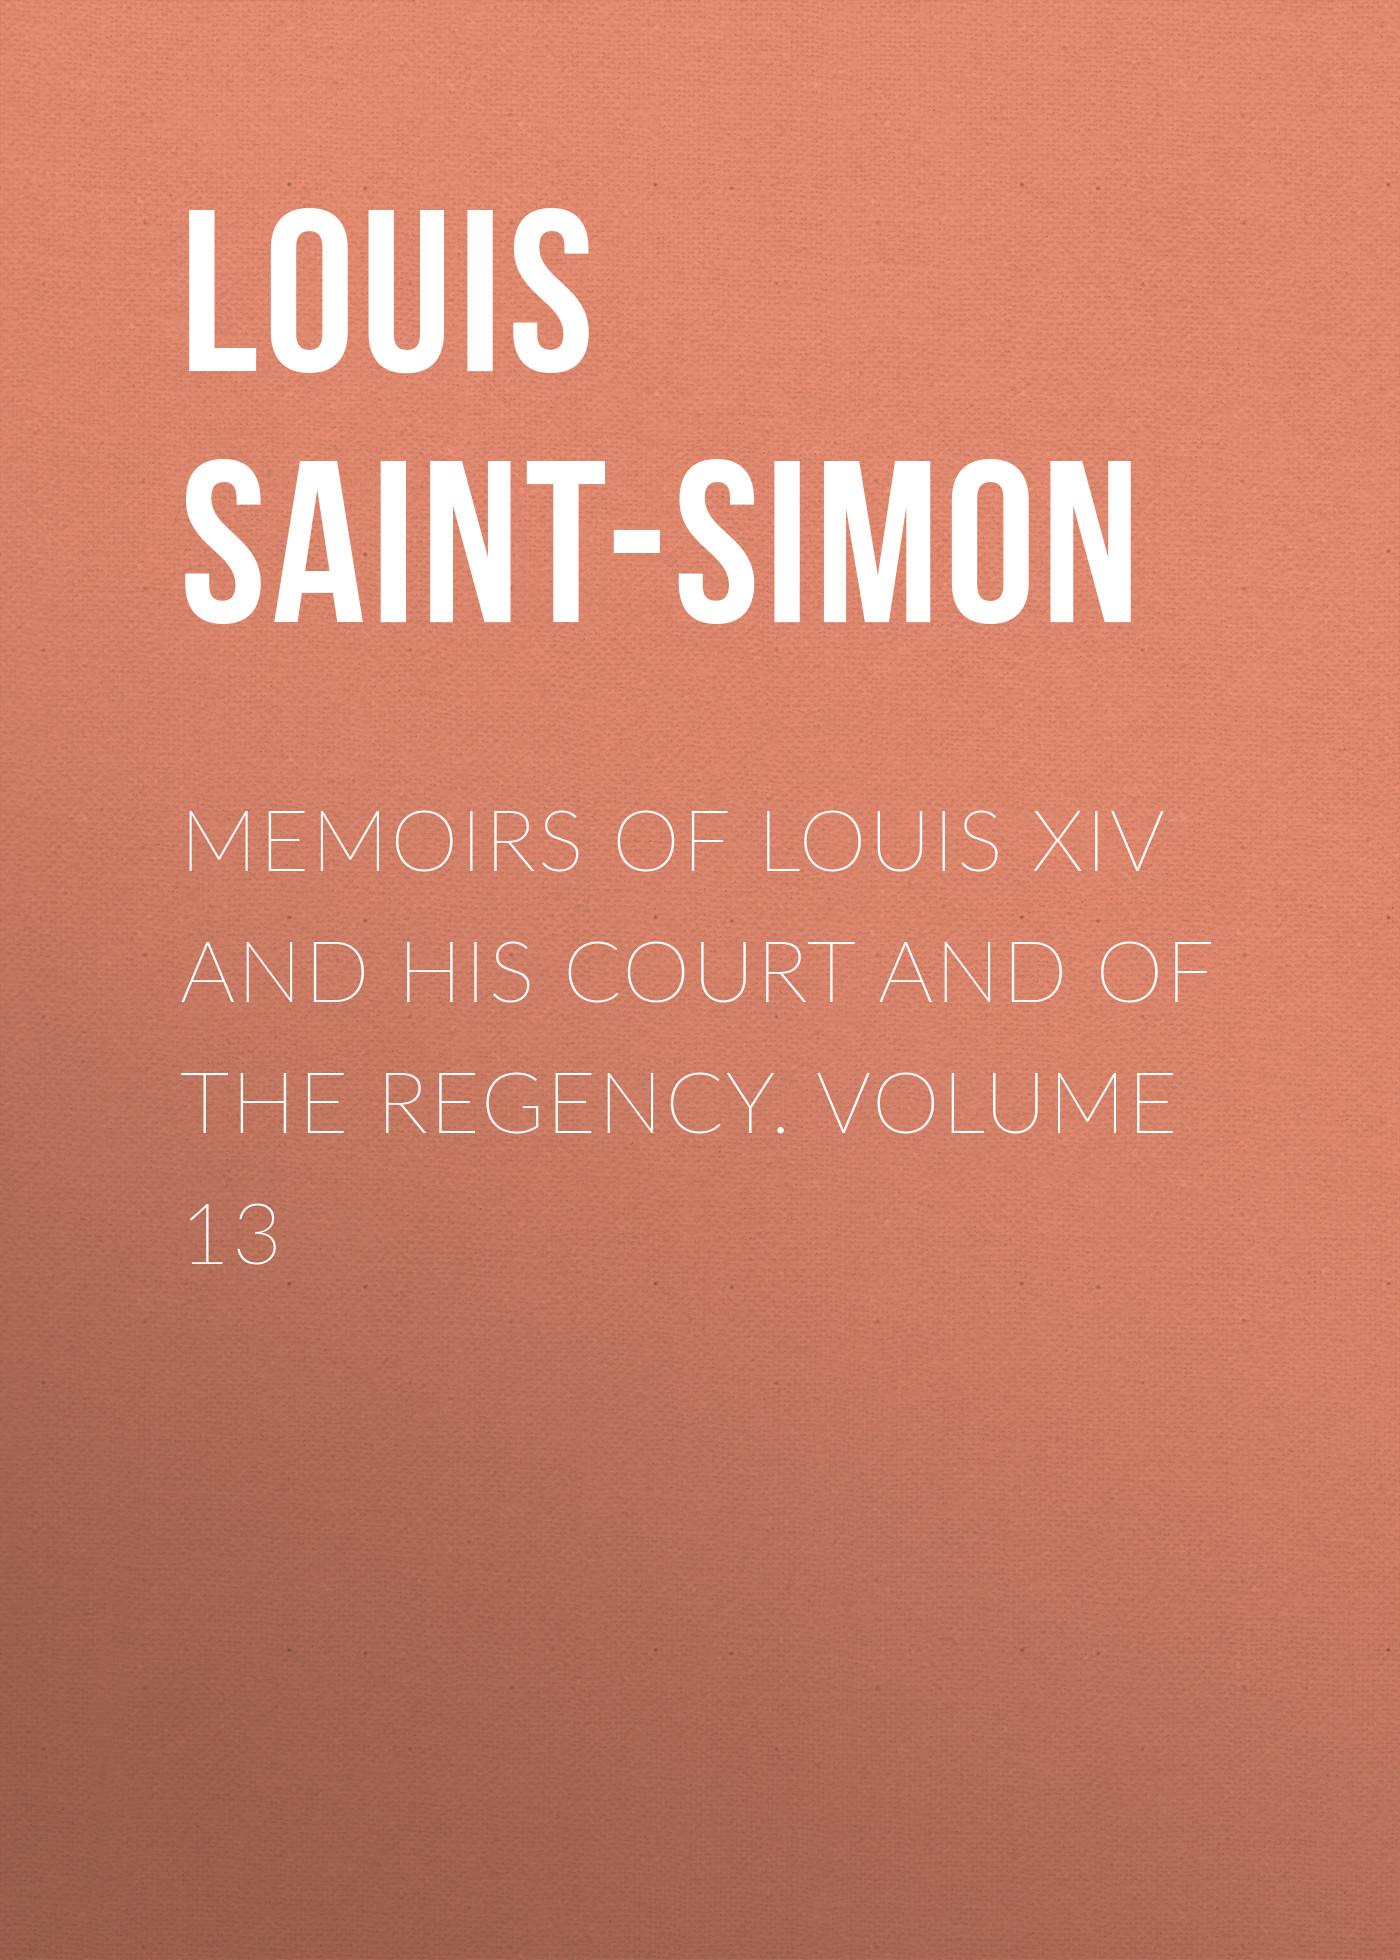 Memoirs of Louis XIV and His Court and of the Regency. Volume 13